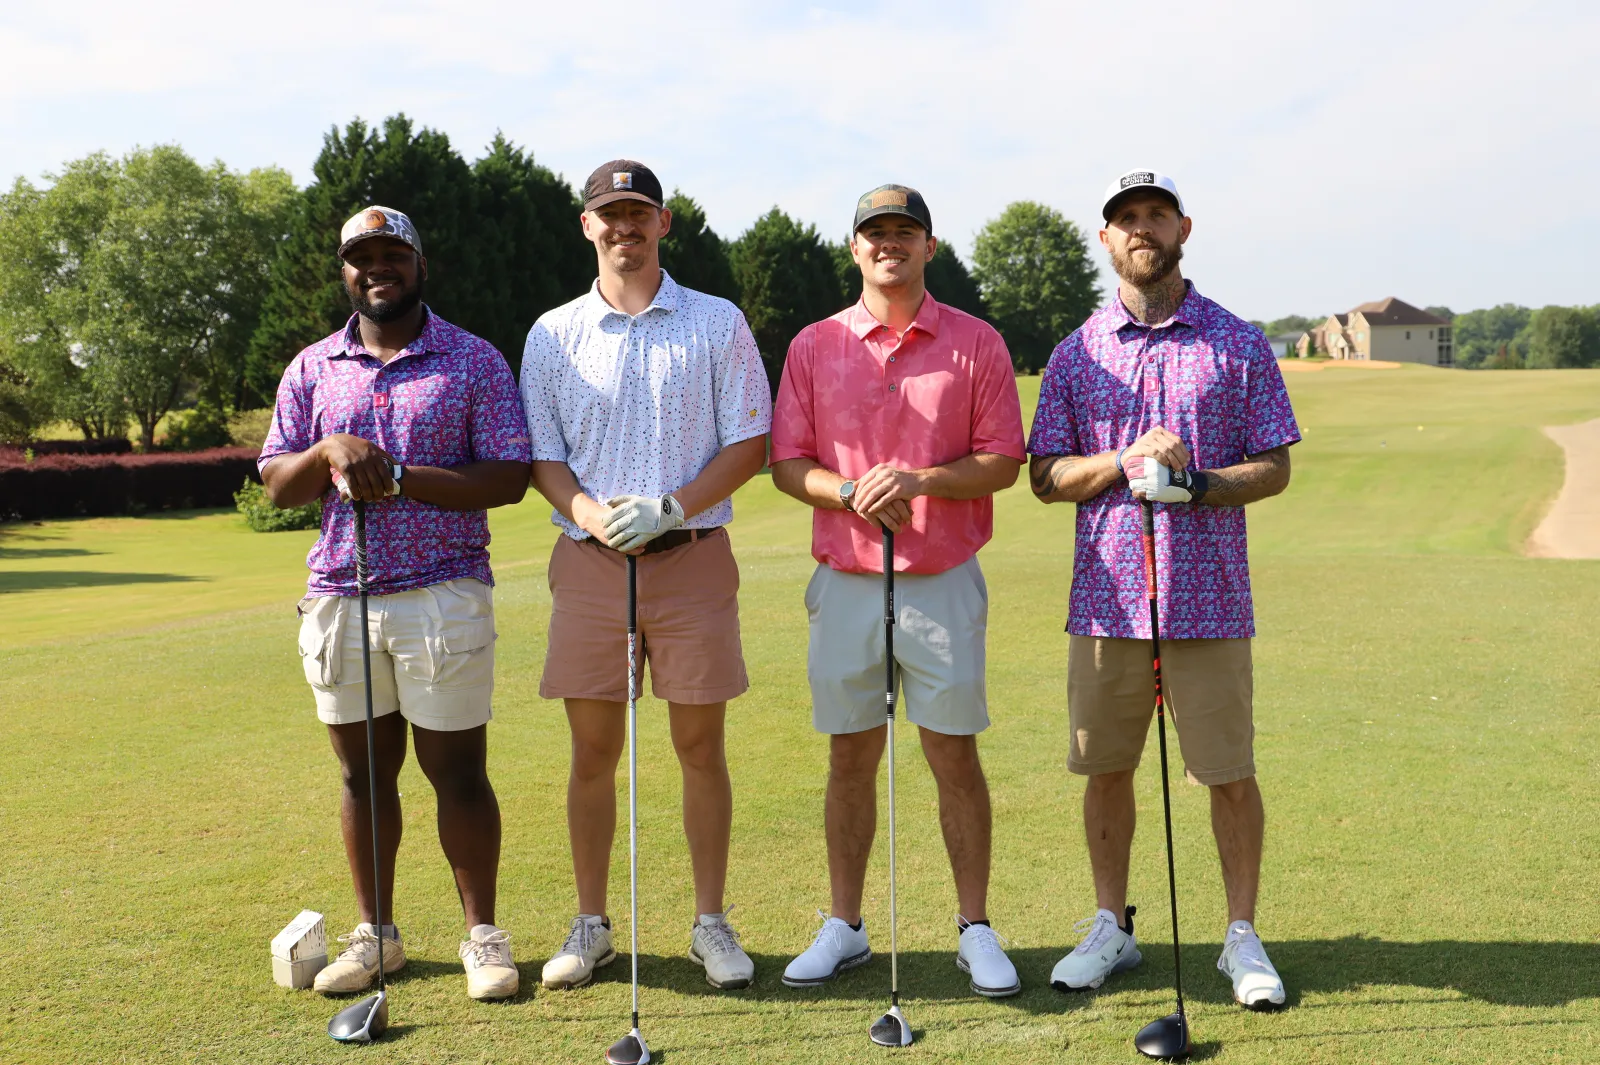 a group of men in golf uniforms